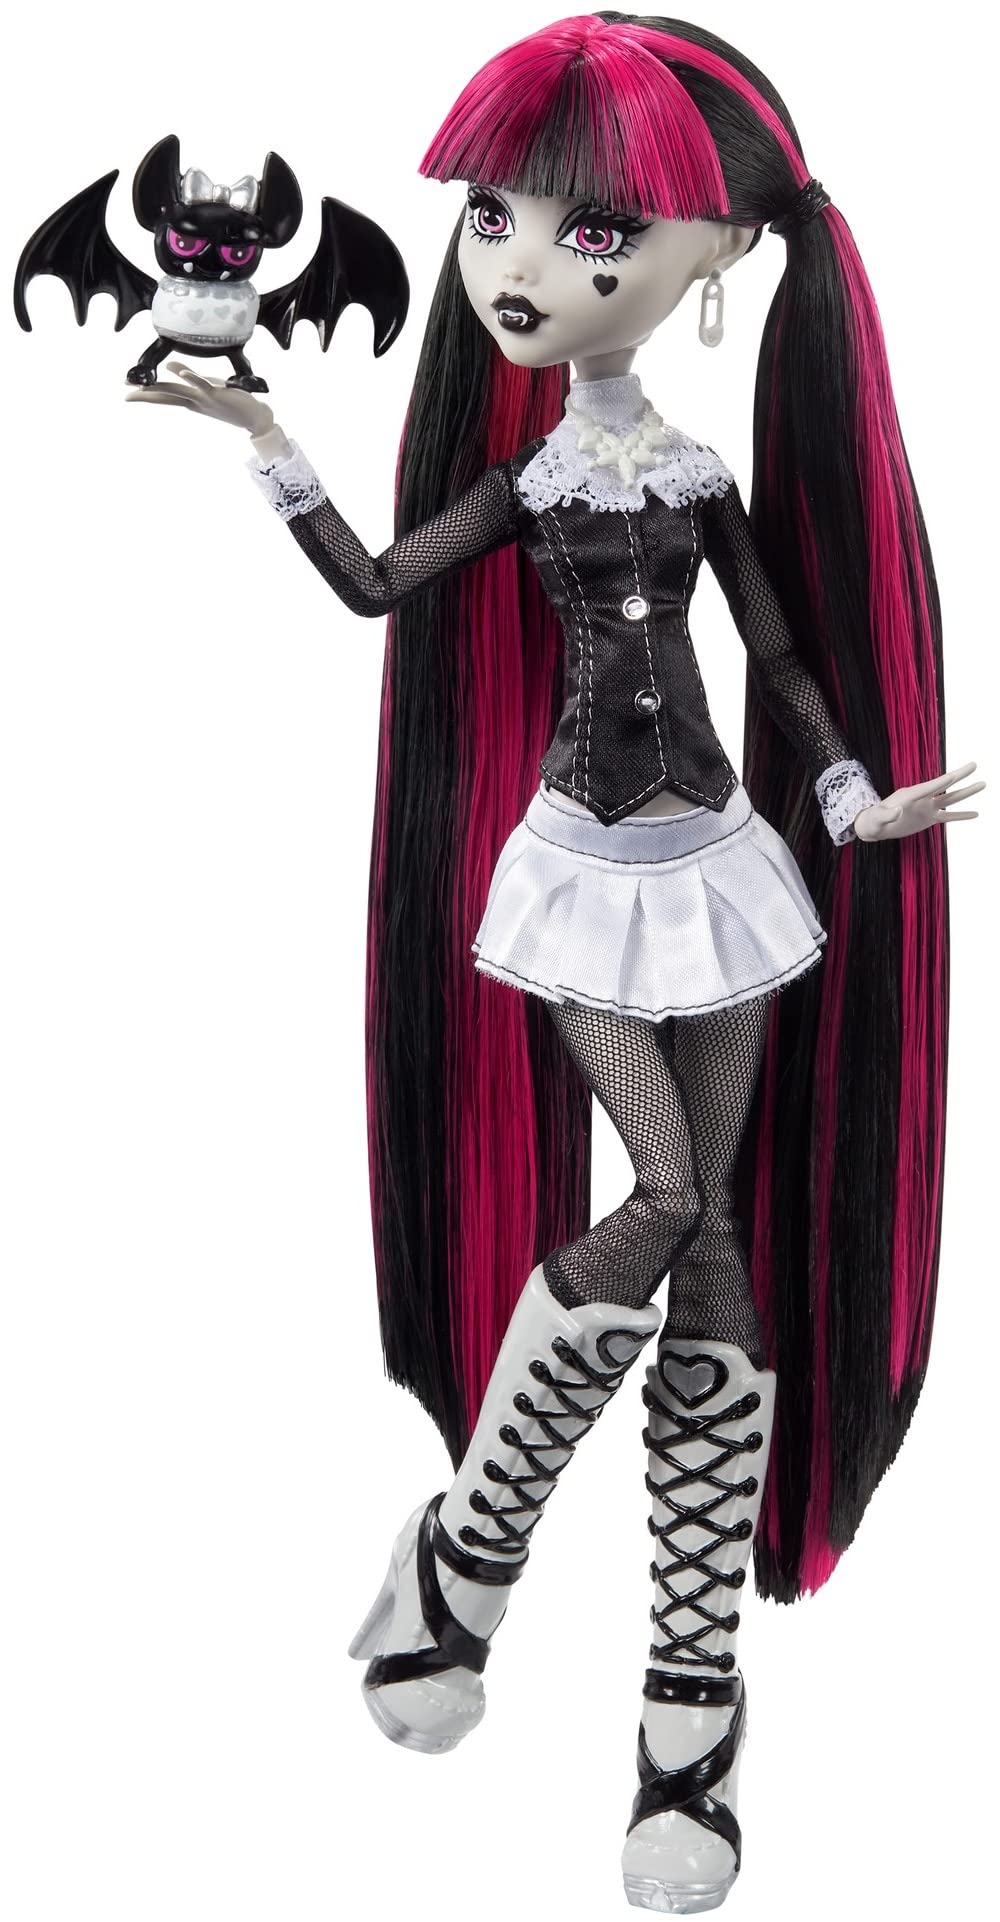 Monster High Doll, Draculaura in Black and White, Reel Drama Collector Doll, Doll-Size and Life-Size Posters, Horror Flick Theme, Toys and Gifts